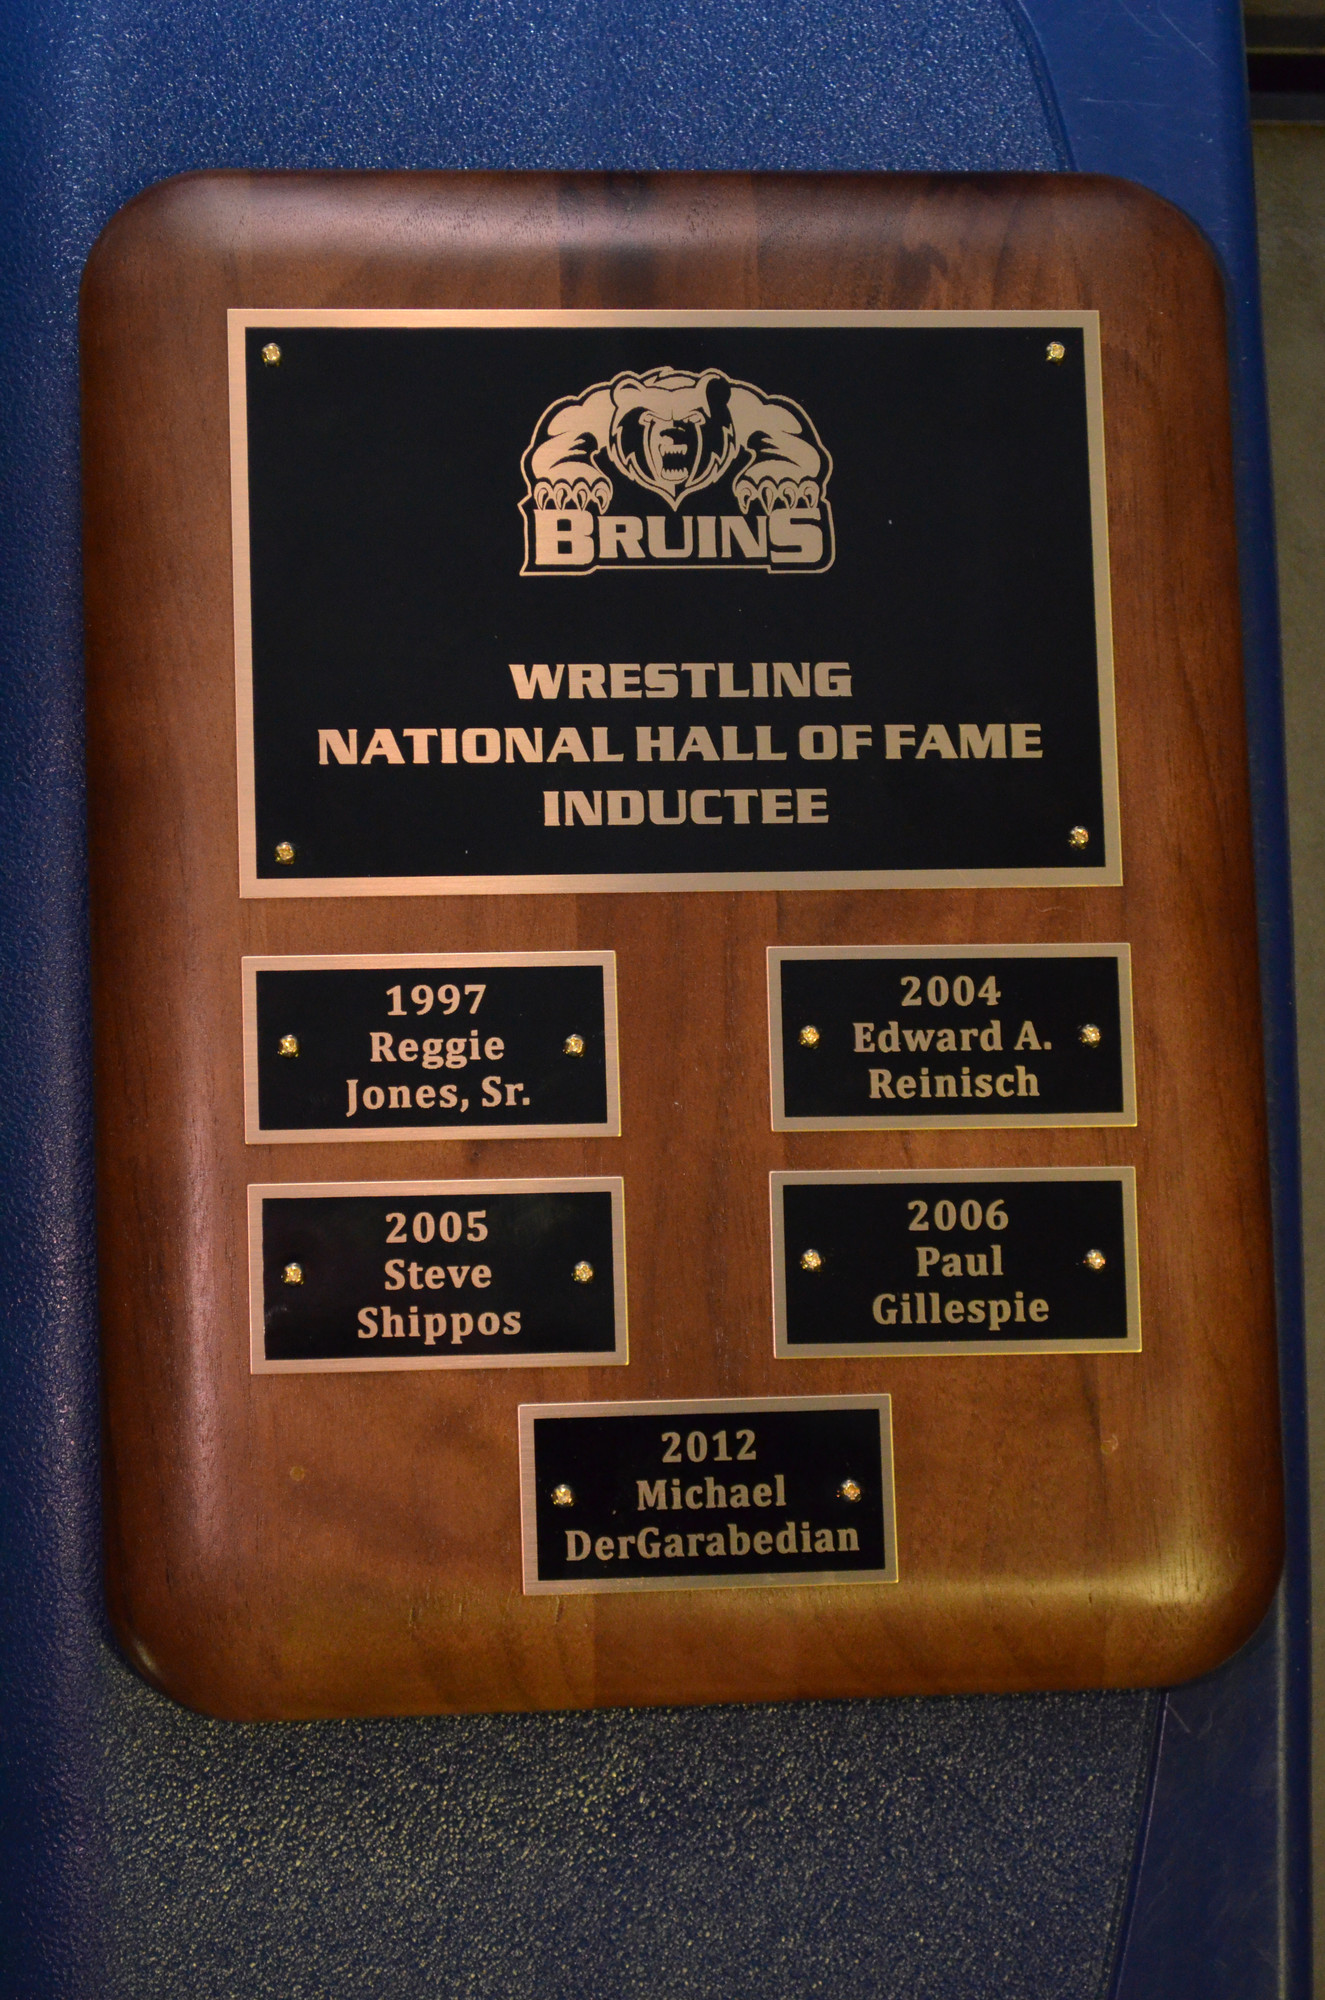 This plaque will hung in Baldwin High School.